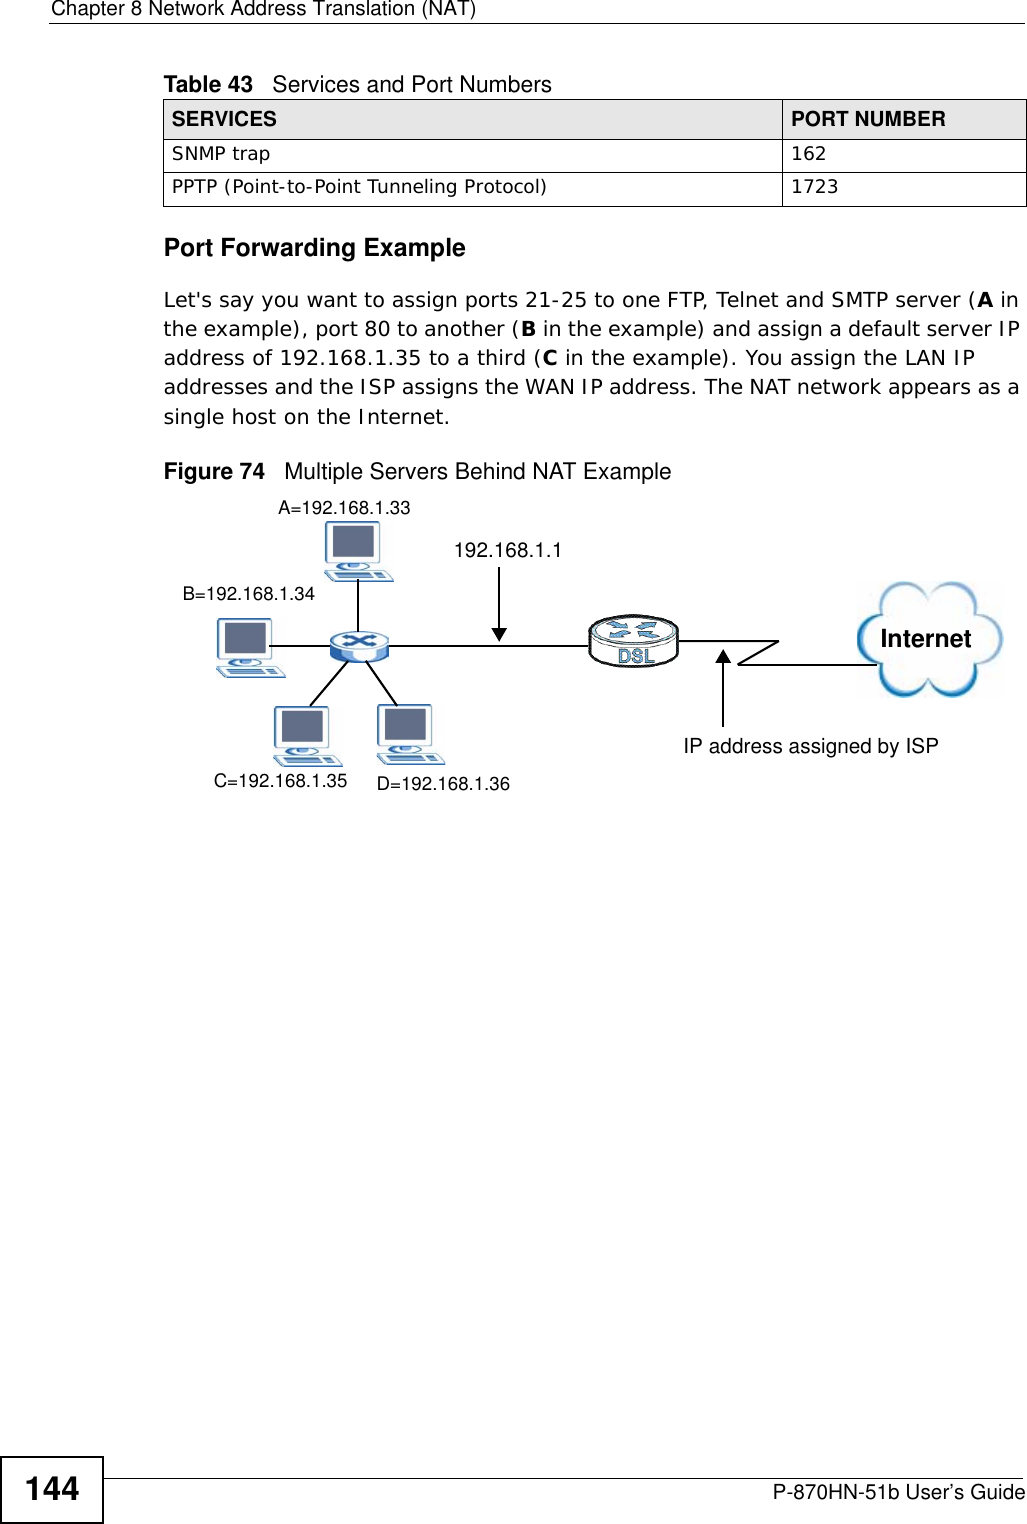 Chapter 8 Network Address Translation (NAT)P-870HN-51b User’s Guide144Port Forwarding ExampleLet&apos;s say you want to assign ports 21-25 to one FTP, Telnet and SMTP server (A in the example), port 80 to another (B in the example) and assign a default server IP address of 192.168.1.35 to a third (C in the example). You assign the LAN IP addresses and the ISP assigns the WAN IP address. The NAT network appears as a single host on the Internet.Figure 74   Multiple Servers Behind NAT ExampleSNMP trap 162PPTP (Point-to-Point Tunneling Protocol) 1723Table 43   Services and Port NumbersSERVICES PORT NUMBERInternetD=192.168.1.36192.168.1.1IP address assigned by ISPA=192.168.1.33B=192.168.1.34C=192.168.1.35